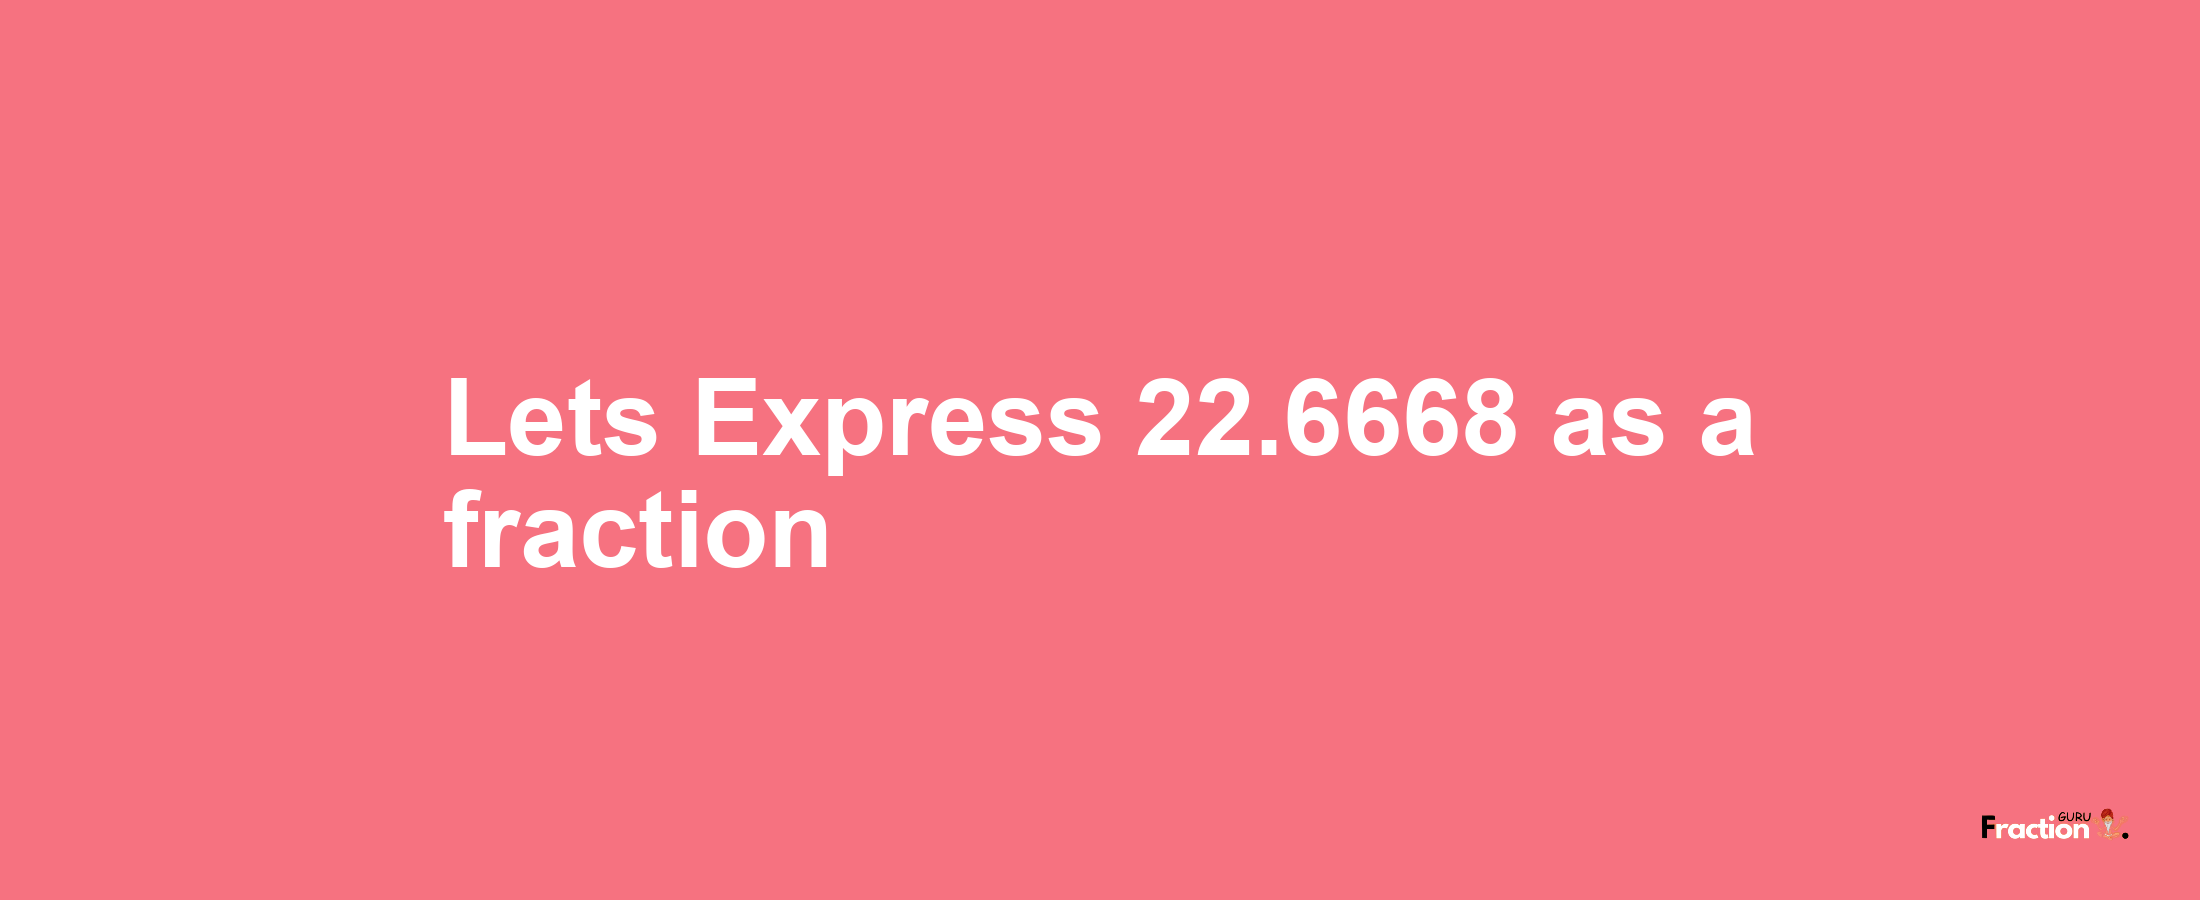 Lets Express 22.6668 as afraction